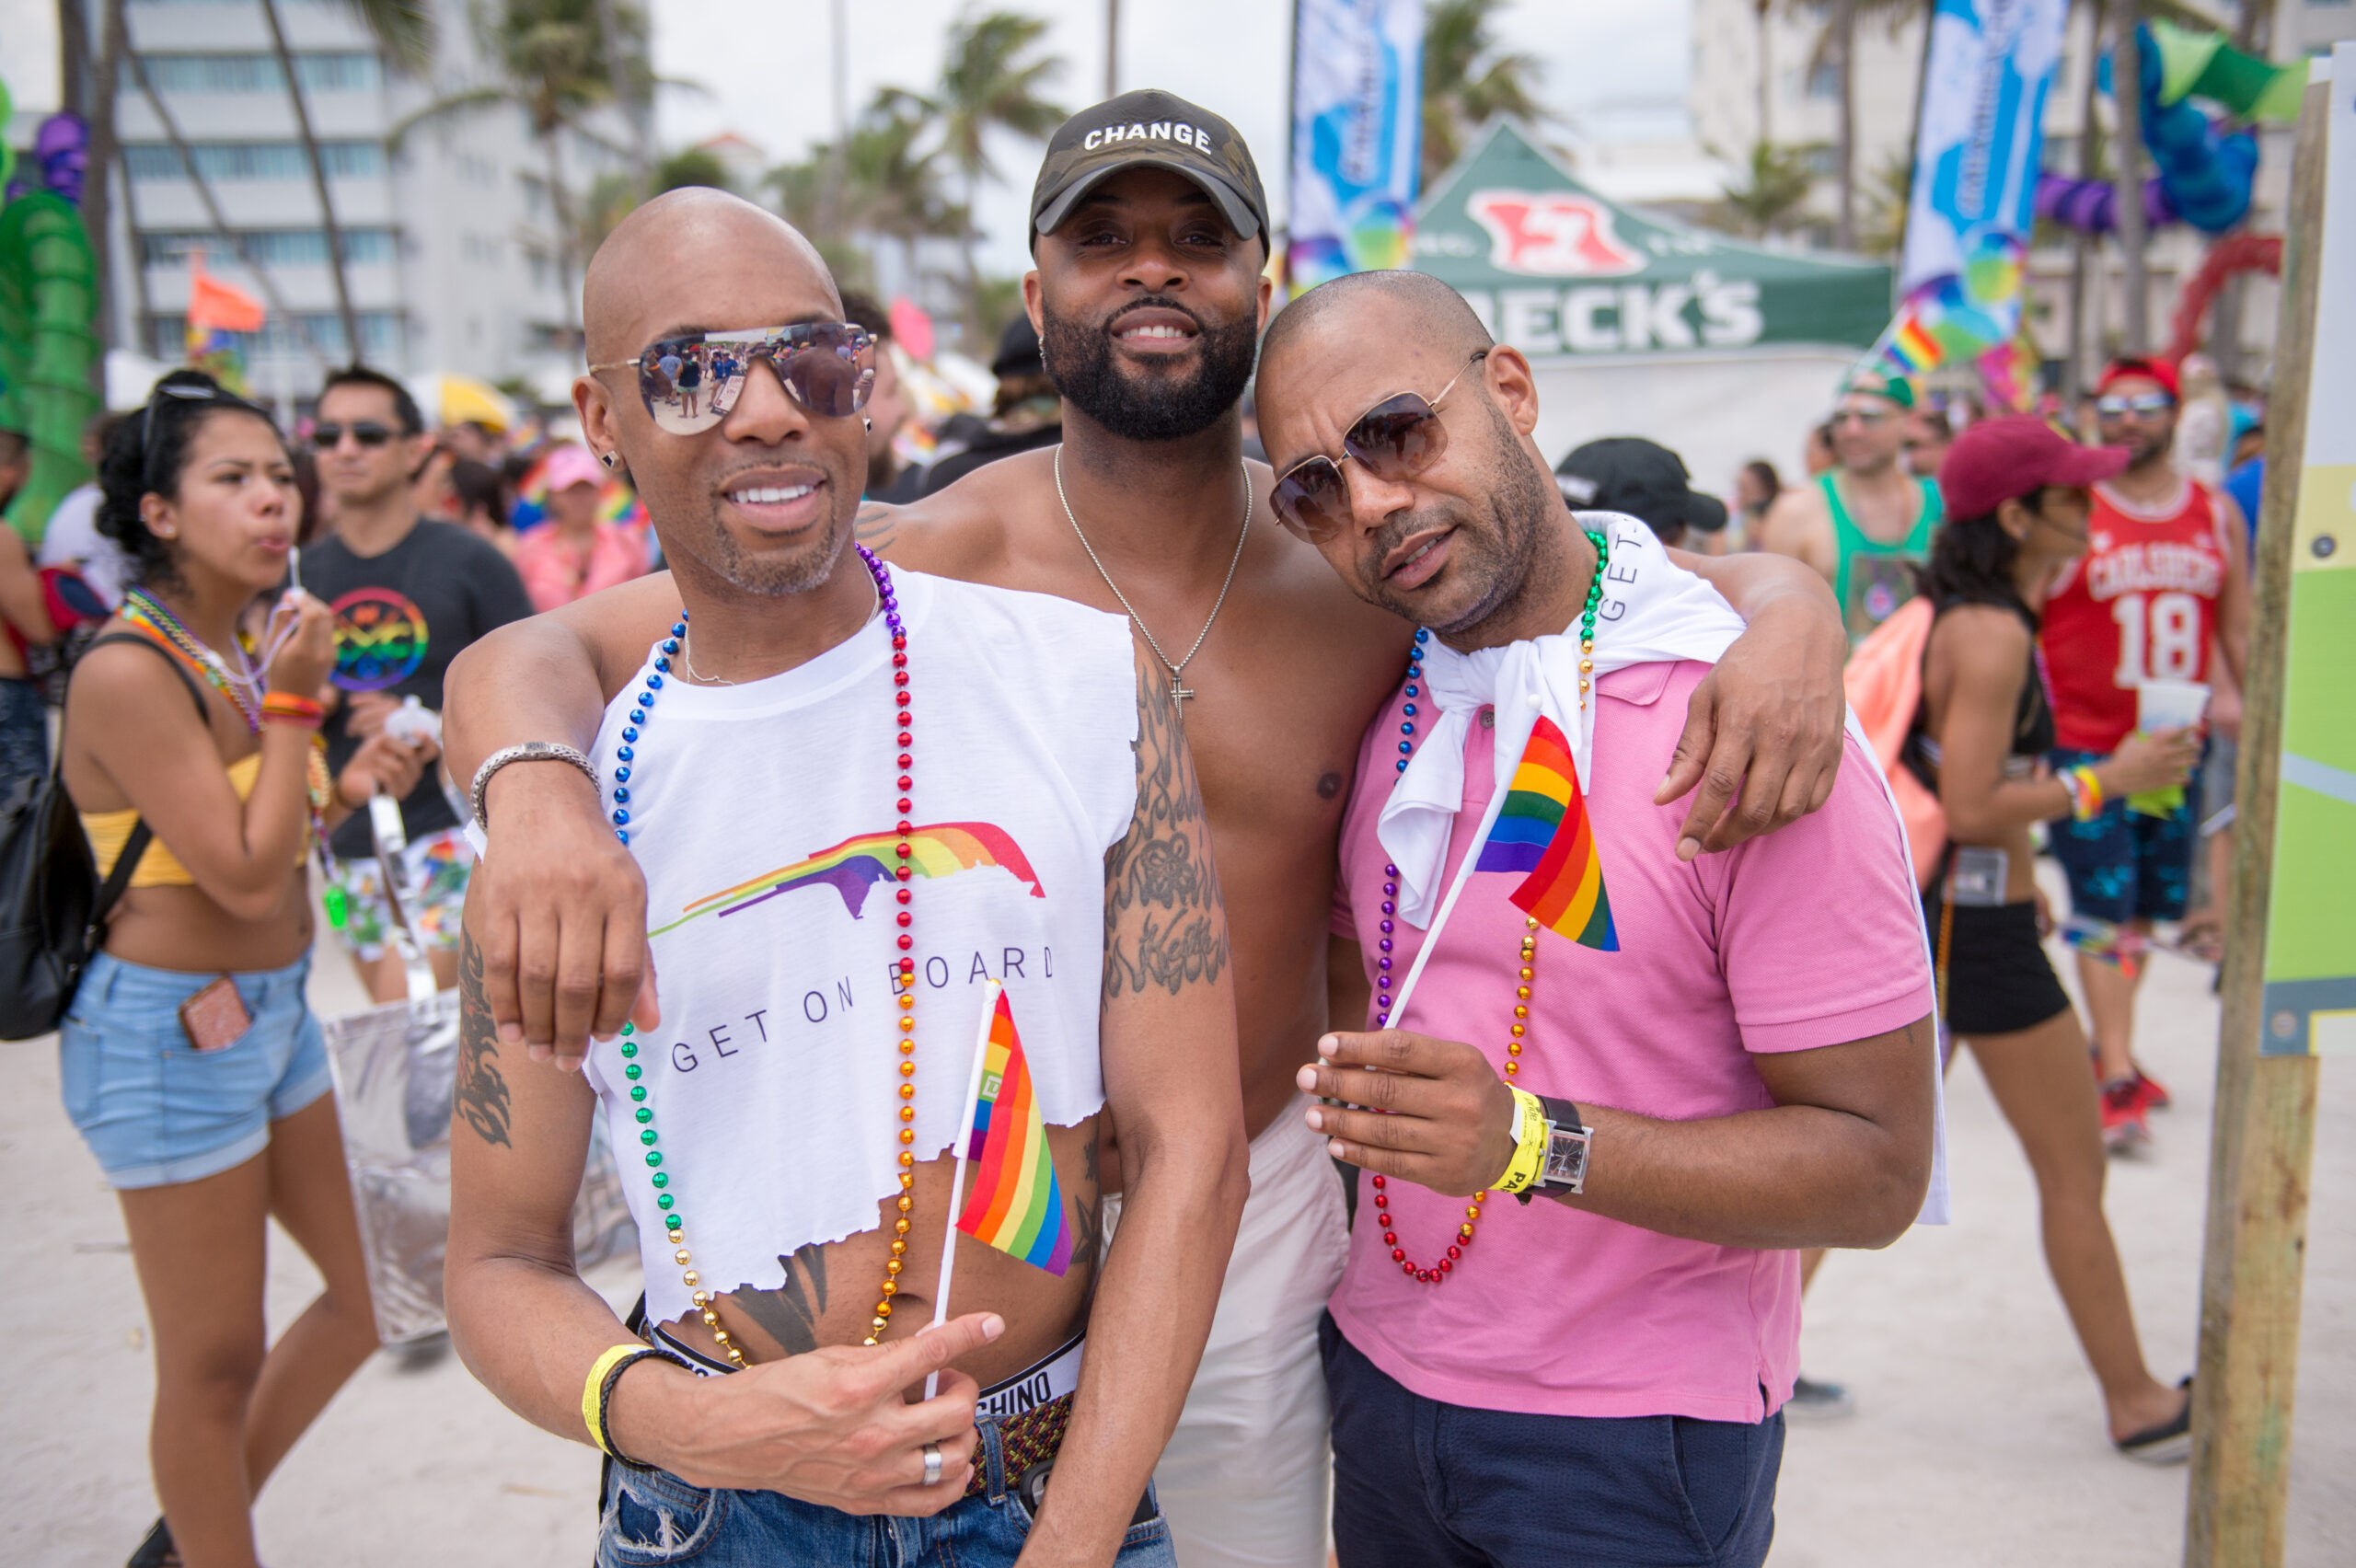 Thousands attended the LGBTQ+ Pride Parade in Miami Beach, Florida